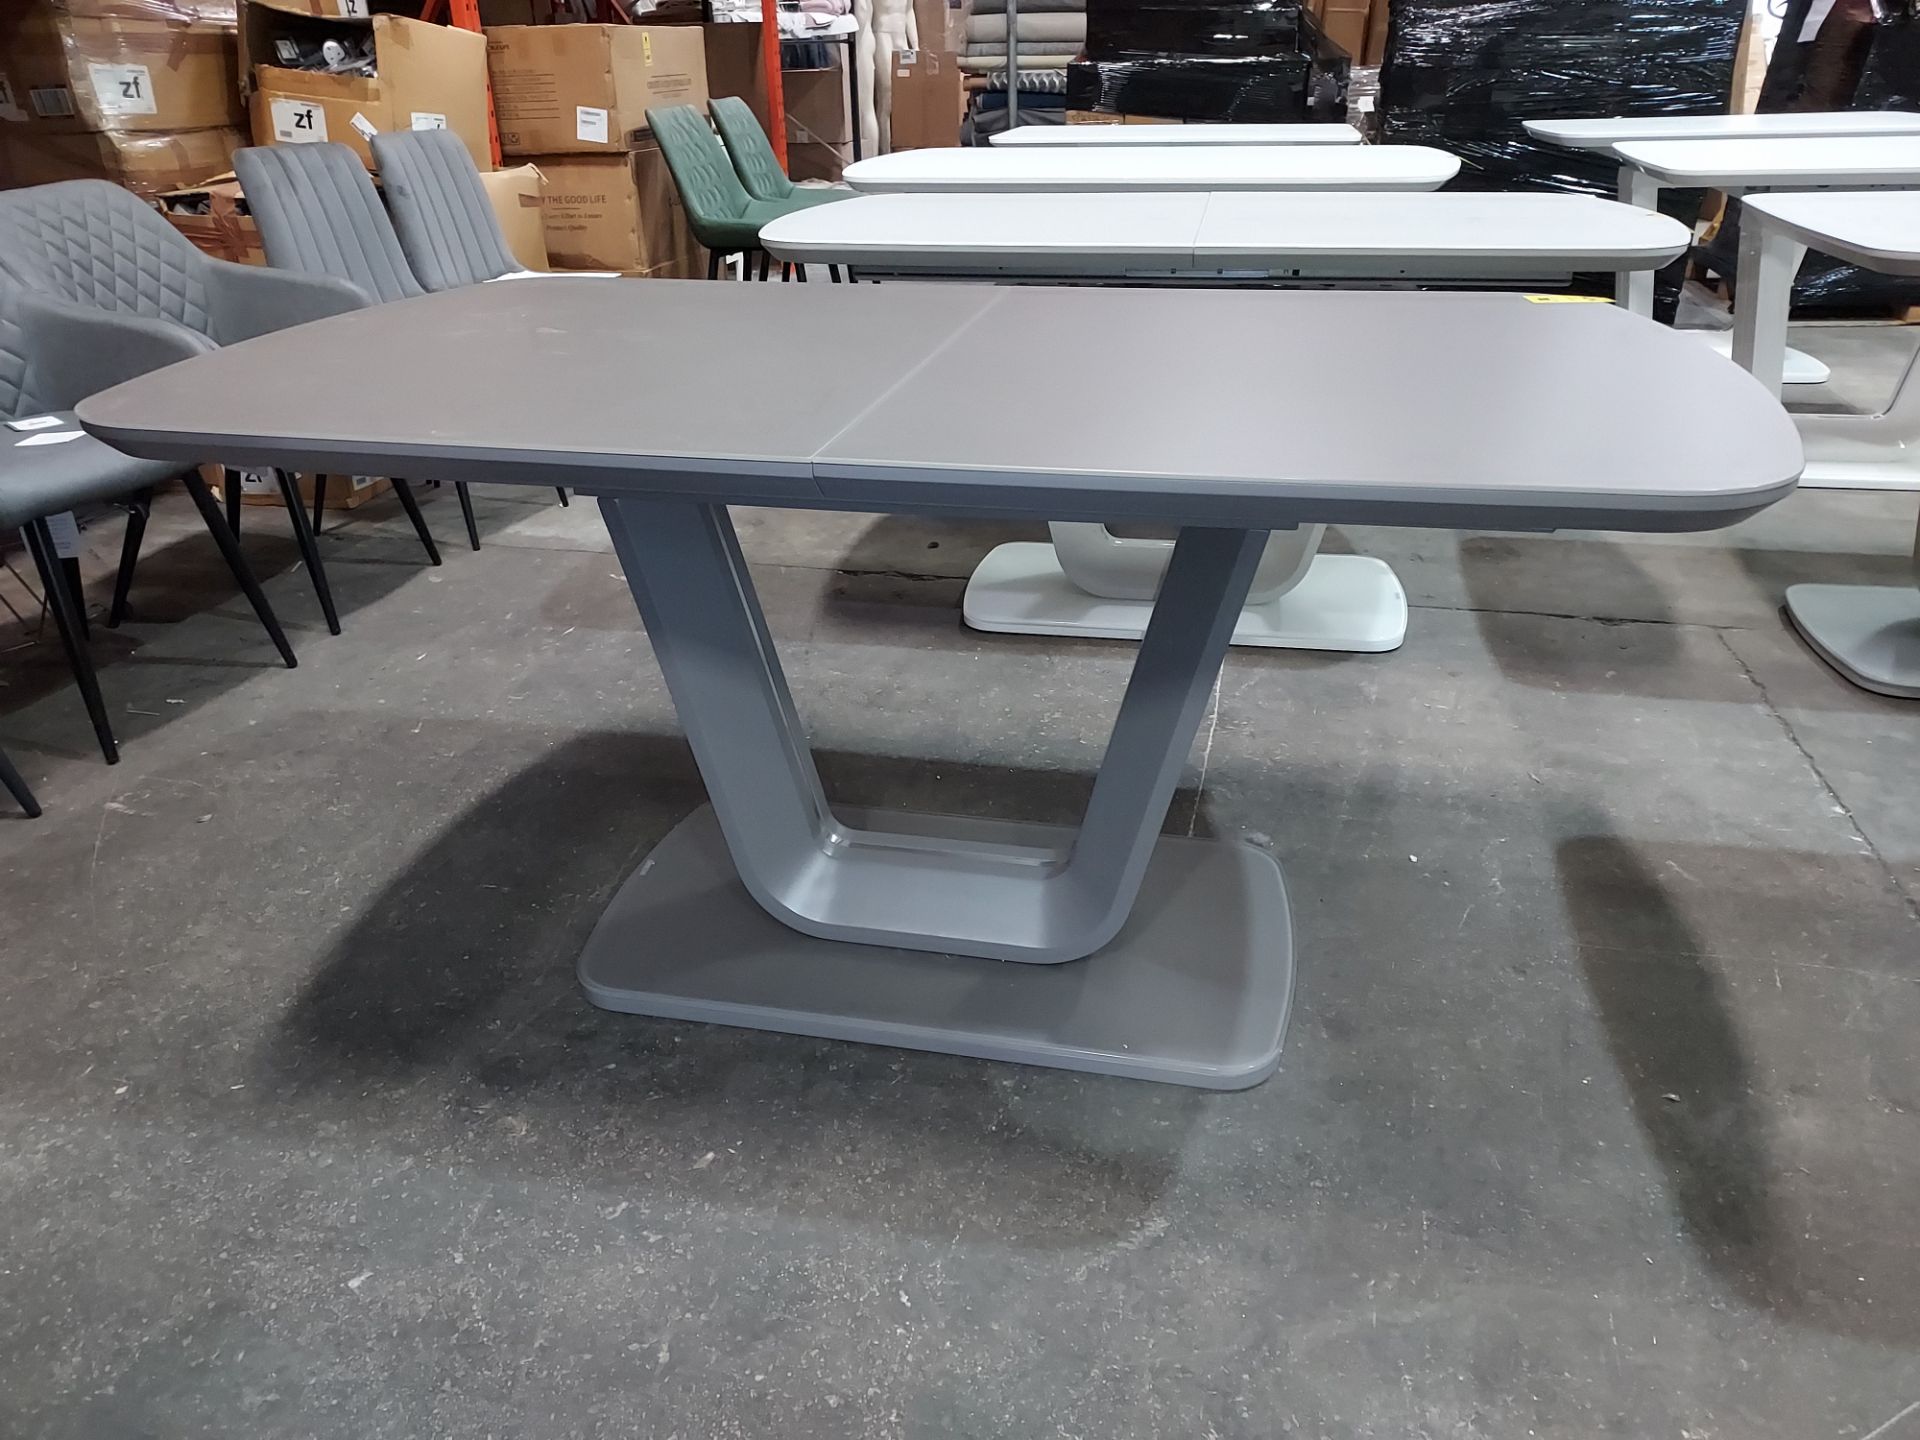 1 X EXTENDABLE LAZZARO DINING TABLE 160/200 CM IN GRAPHITE GREY - NOTE CUSTOMER RETURNS